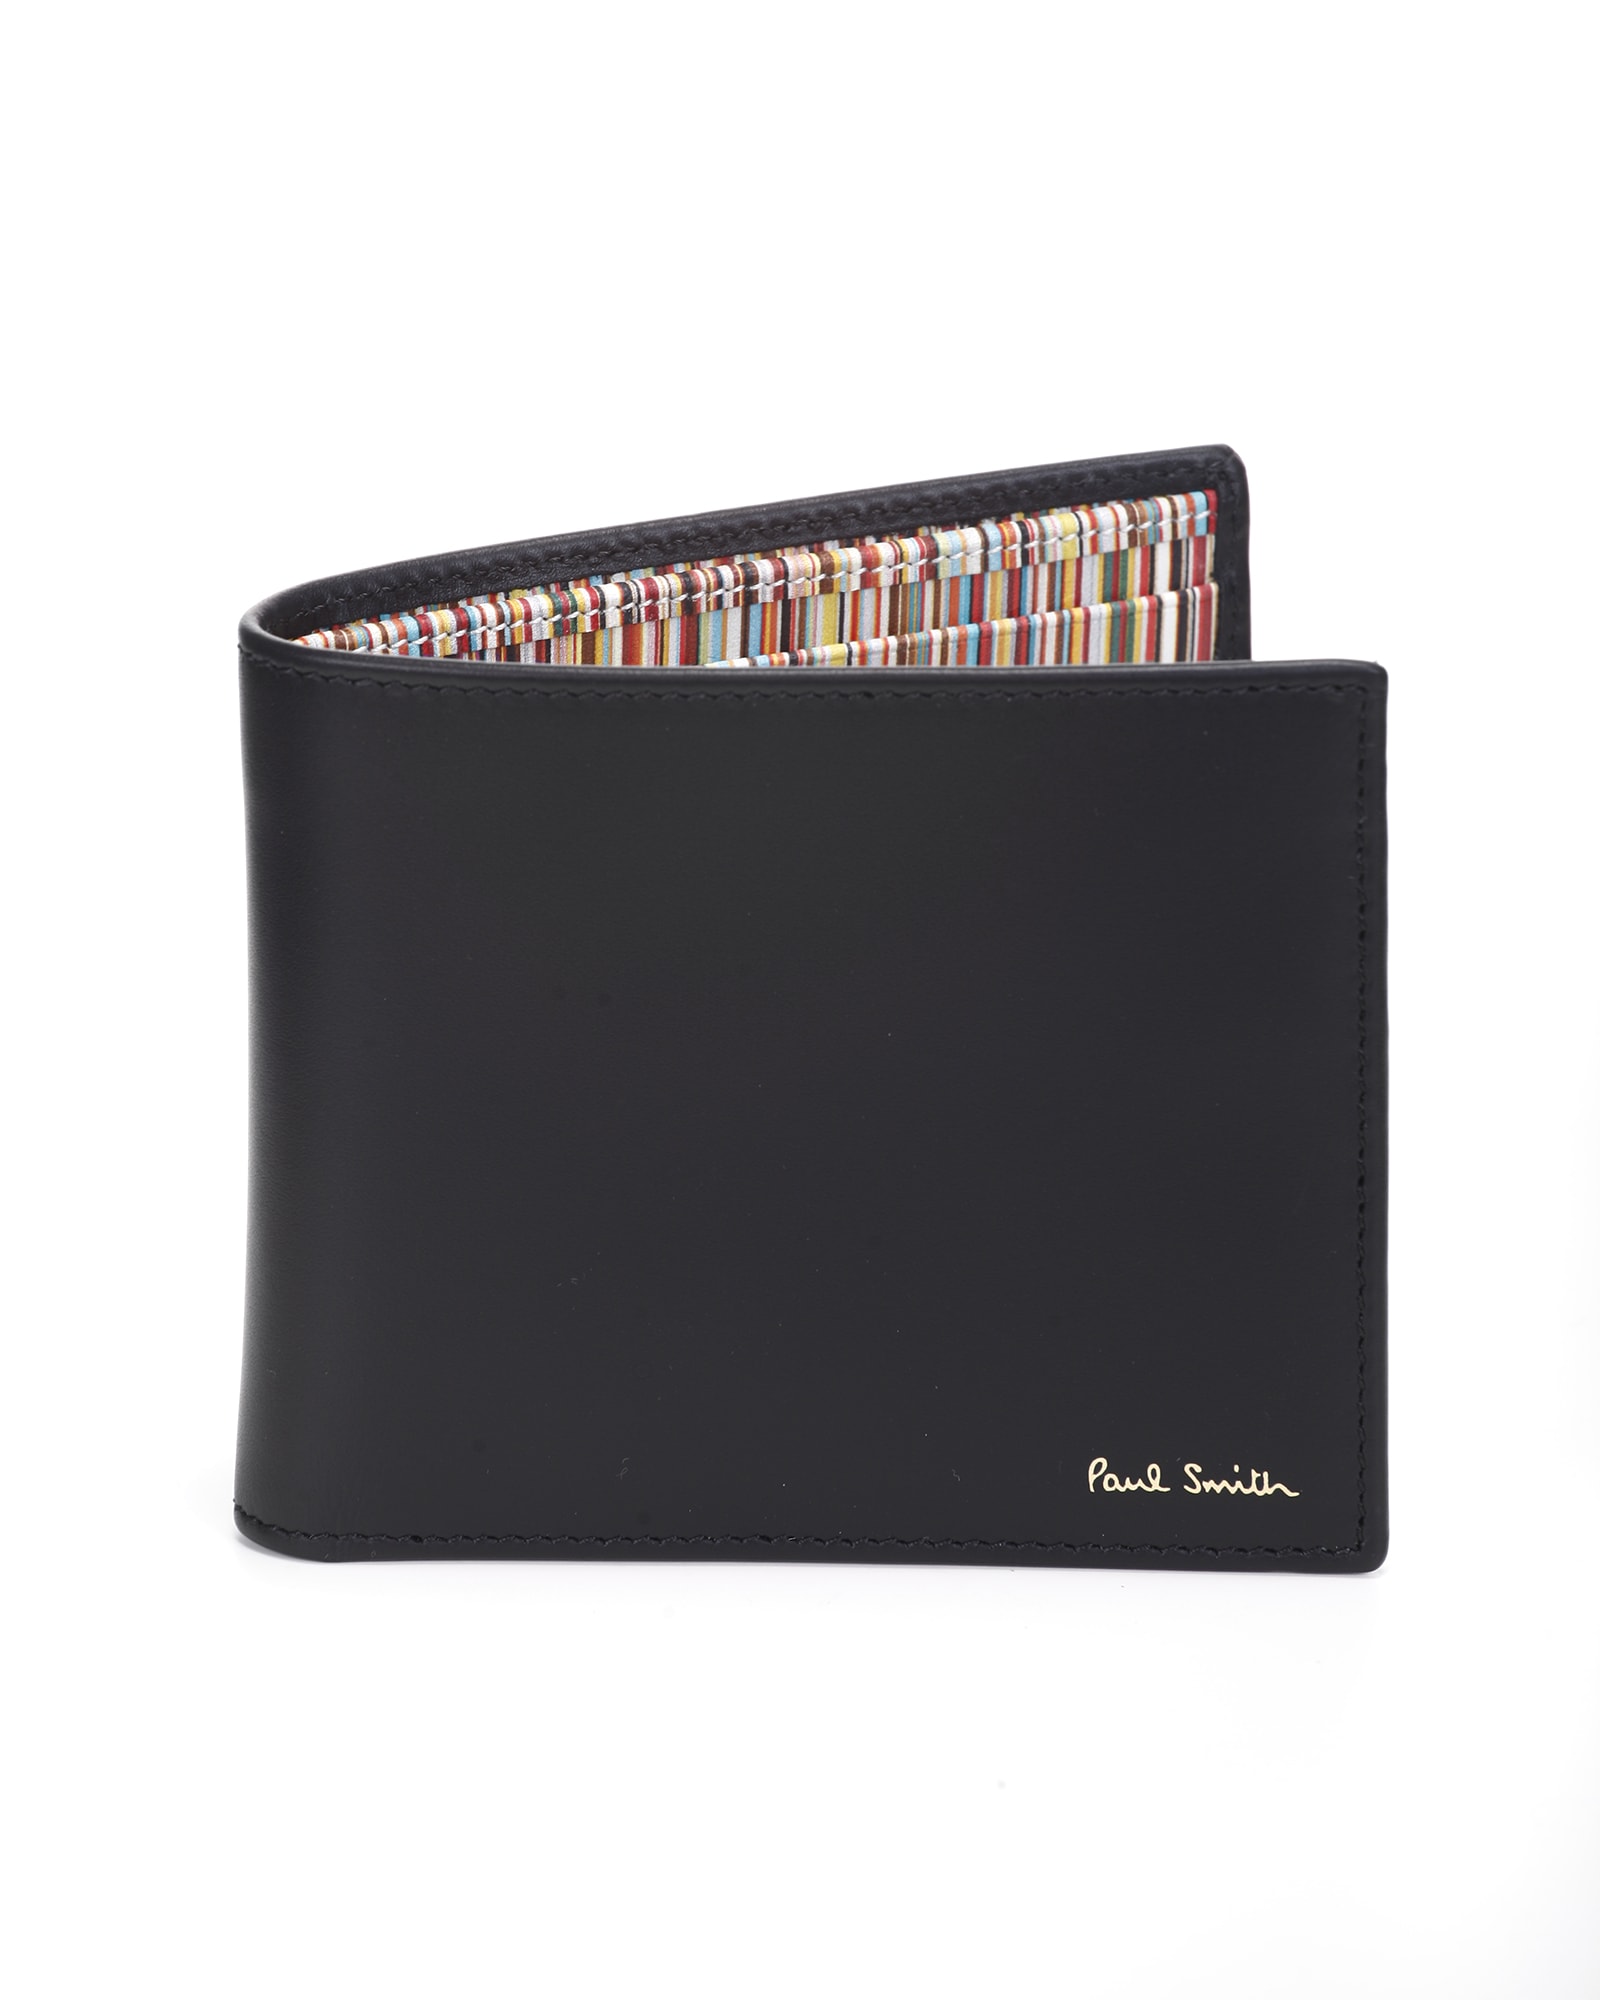 Paul Smith black leather wallet